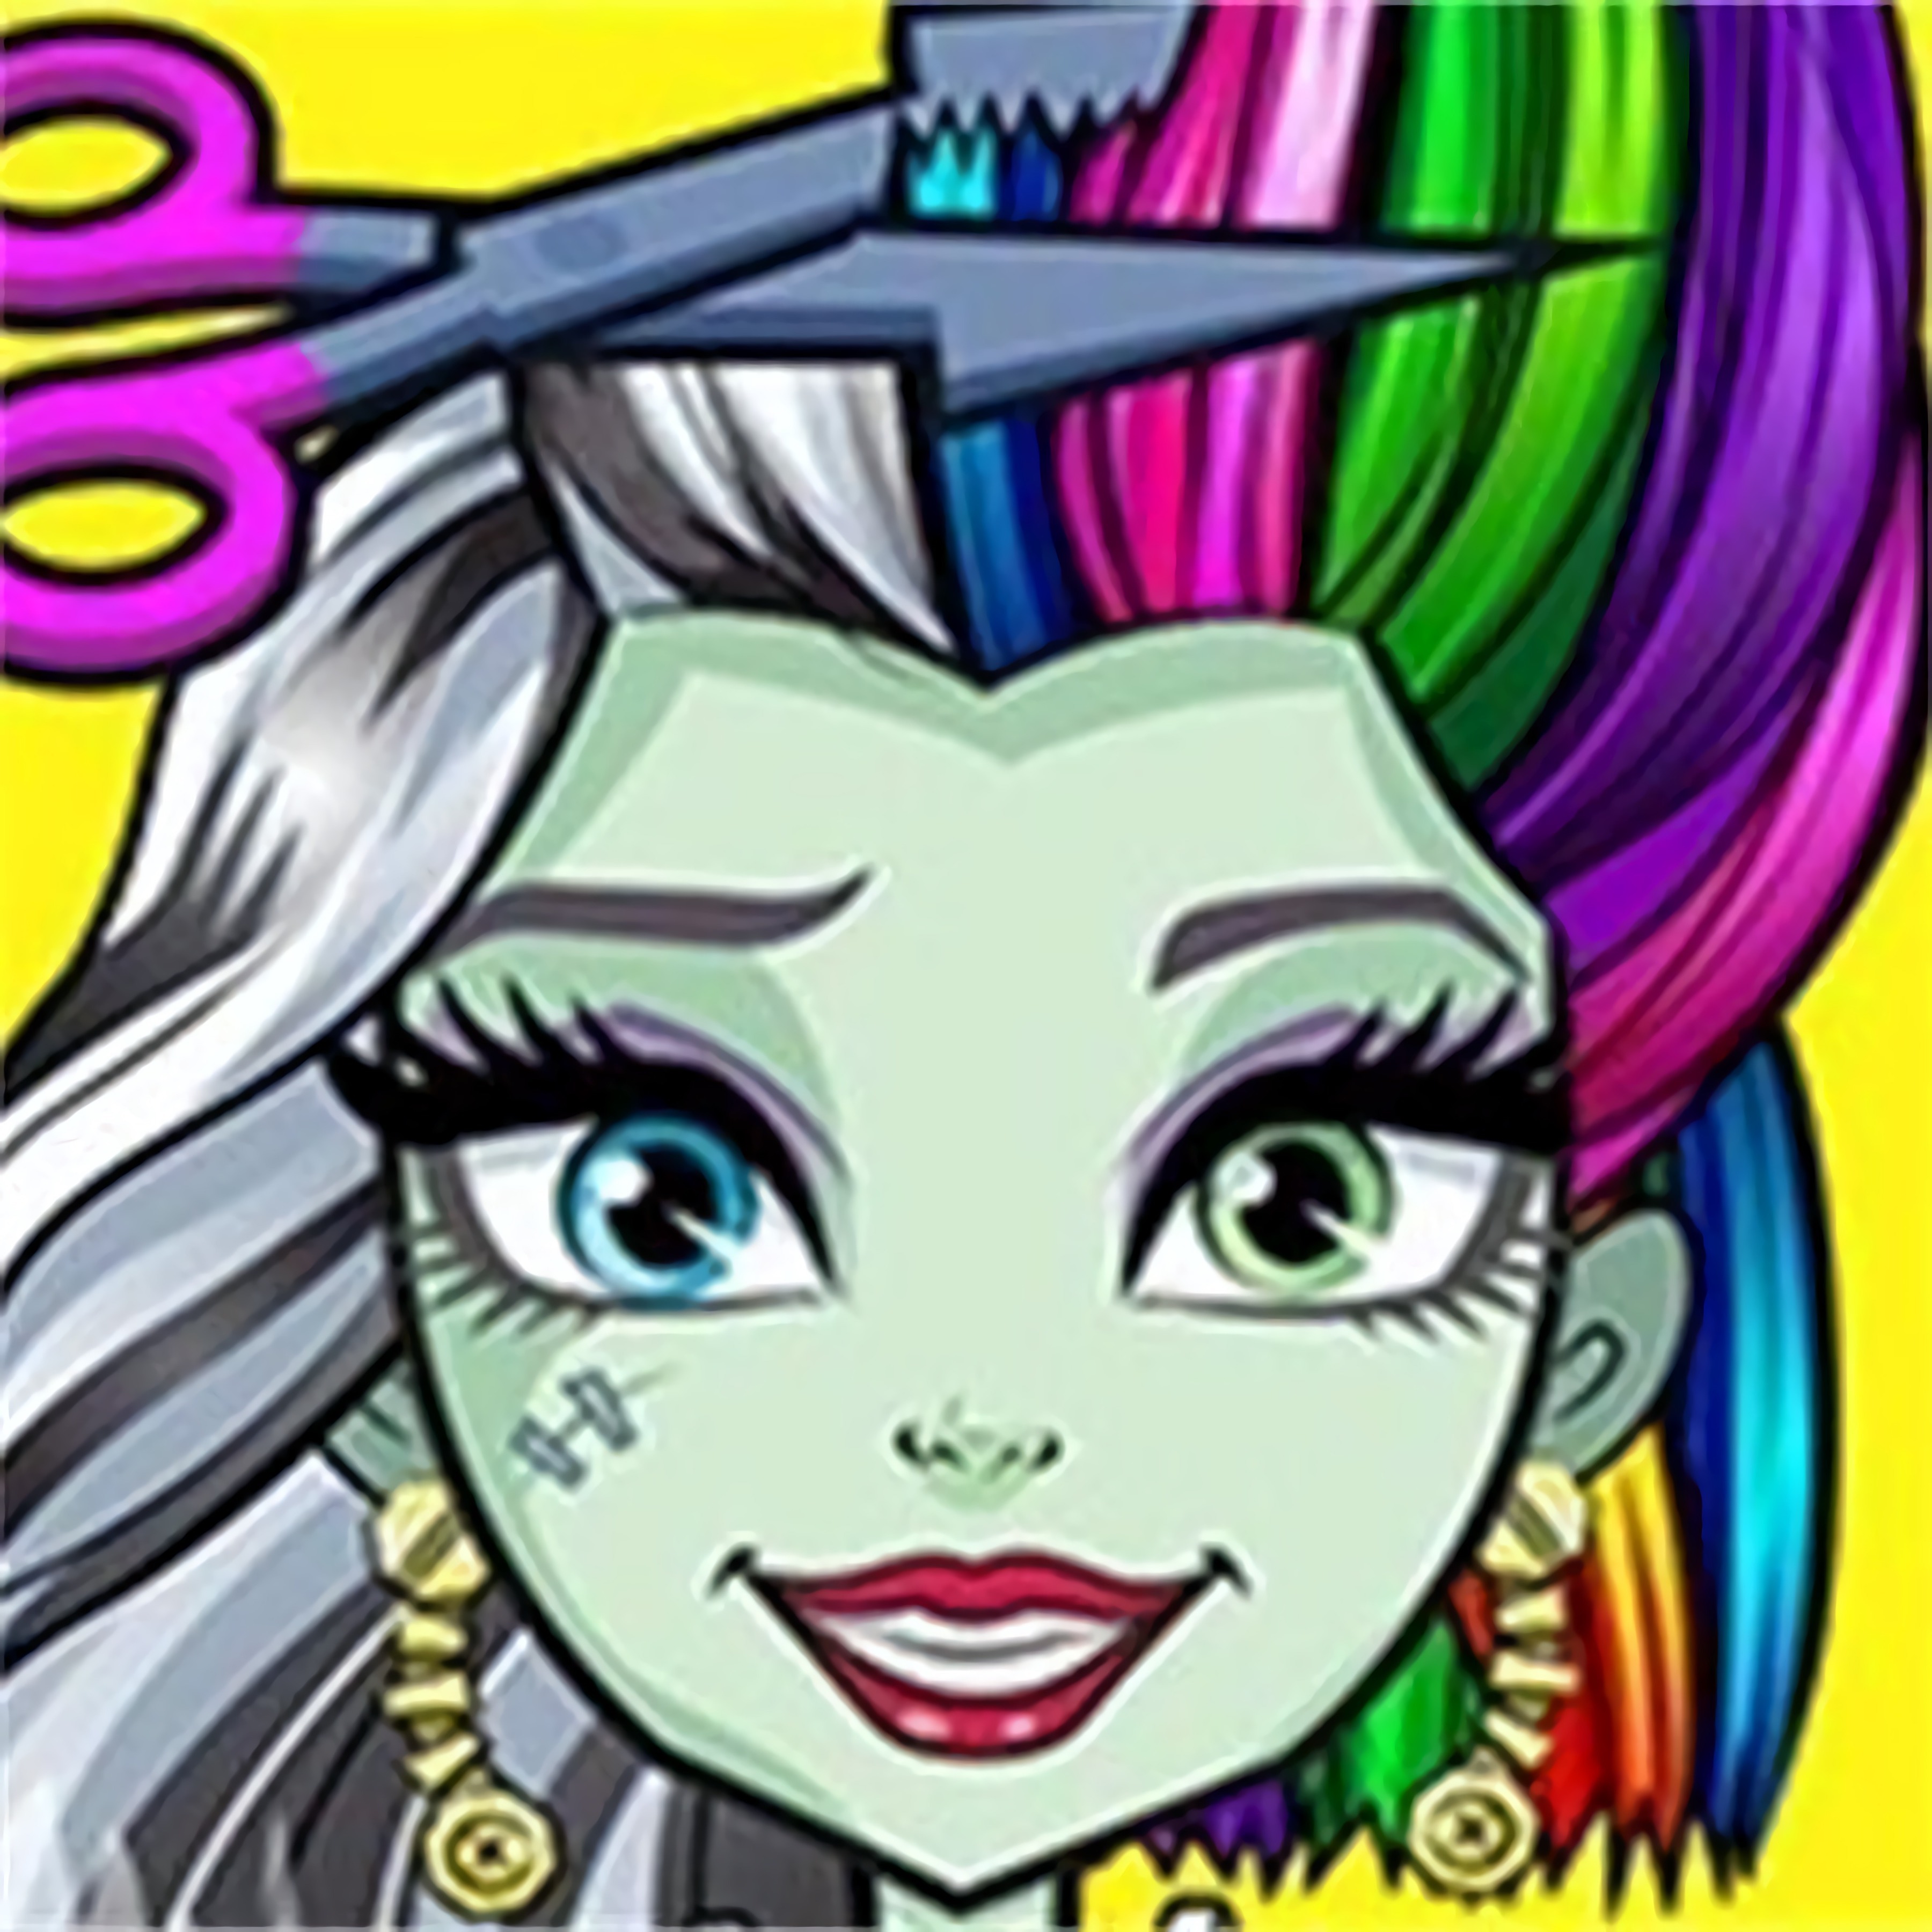 Makeup Girls - Games for kids - Apps on Google Play